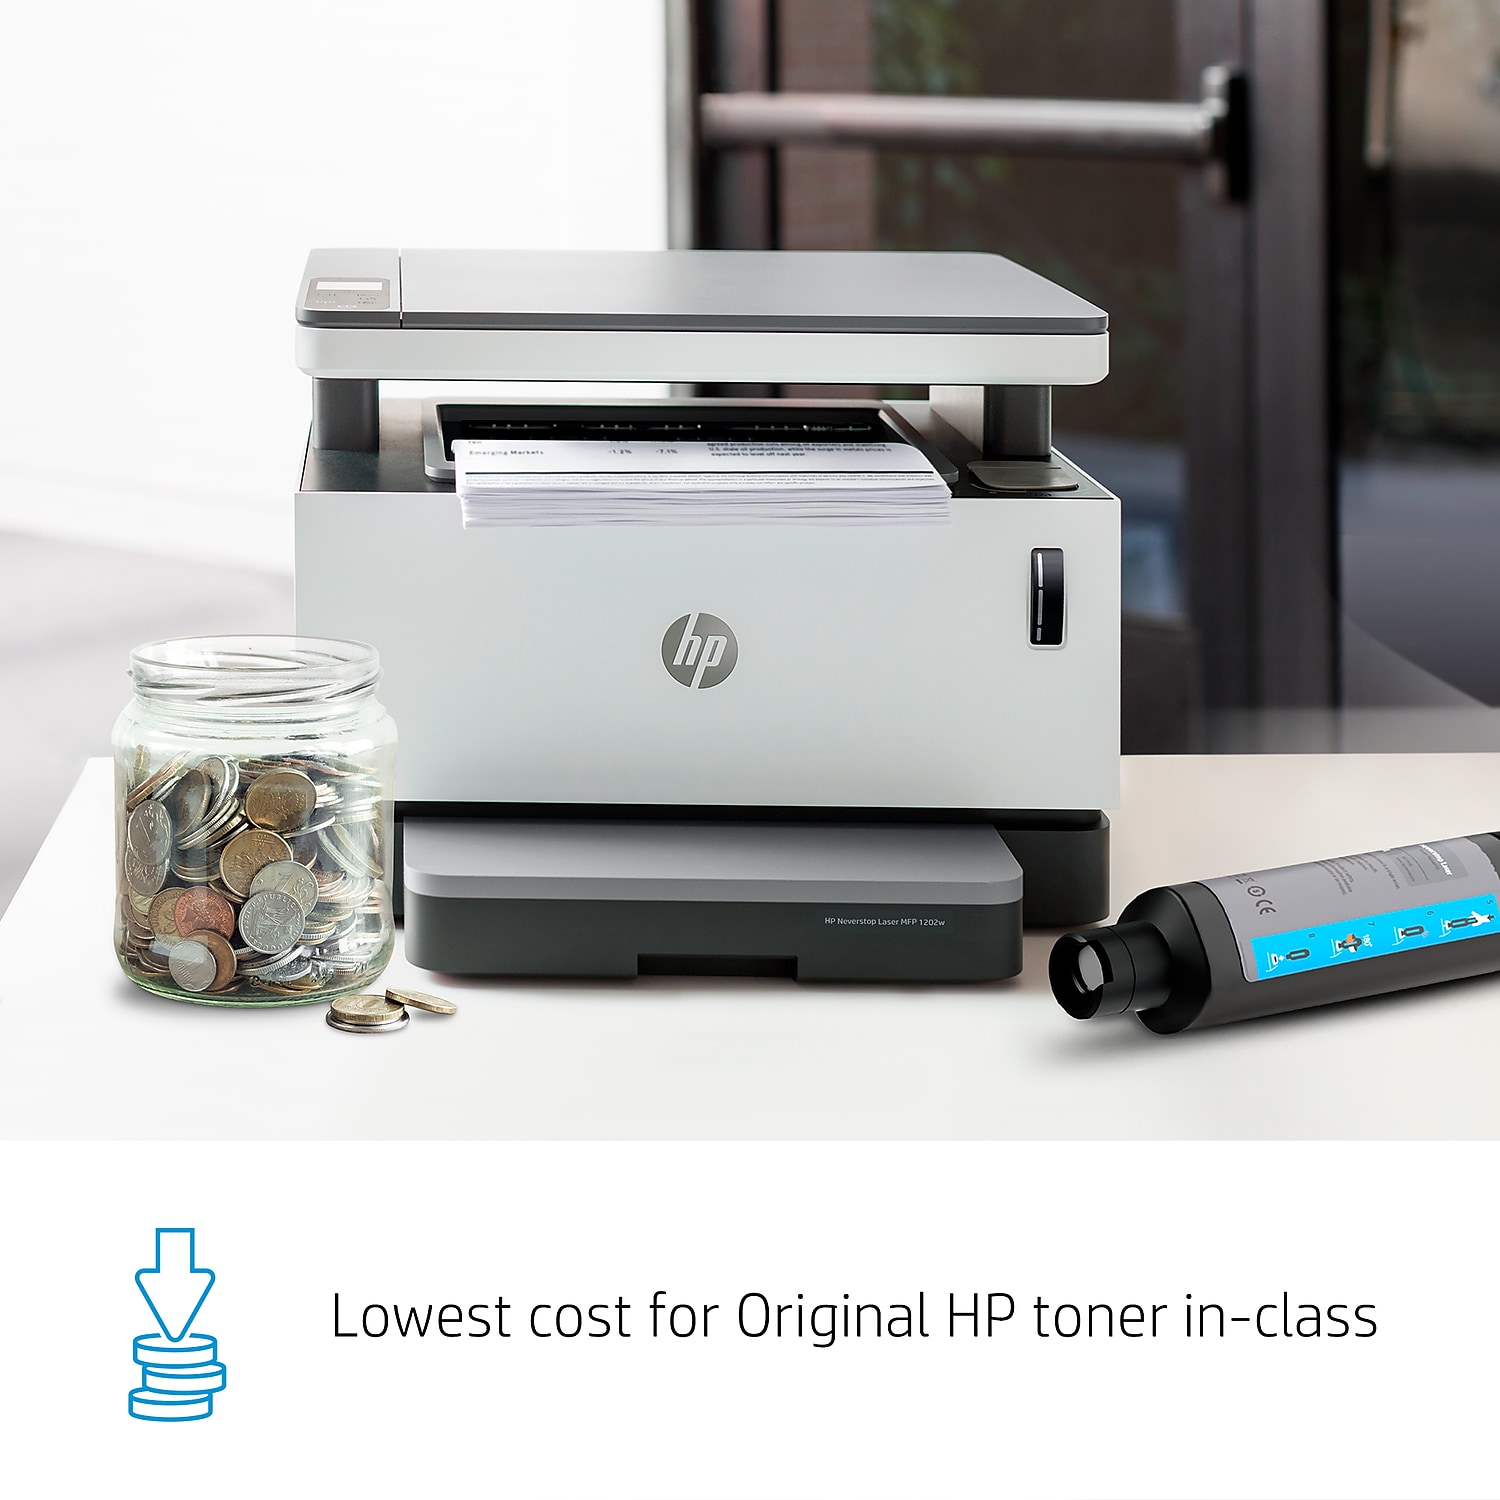 HP Neverstop MFP 1202w Wireless Laser All-In-One Refillable Tank Monochrome Printer - image 4 of 9